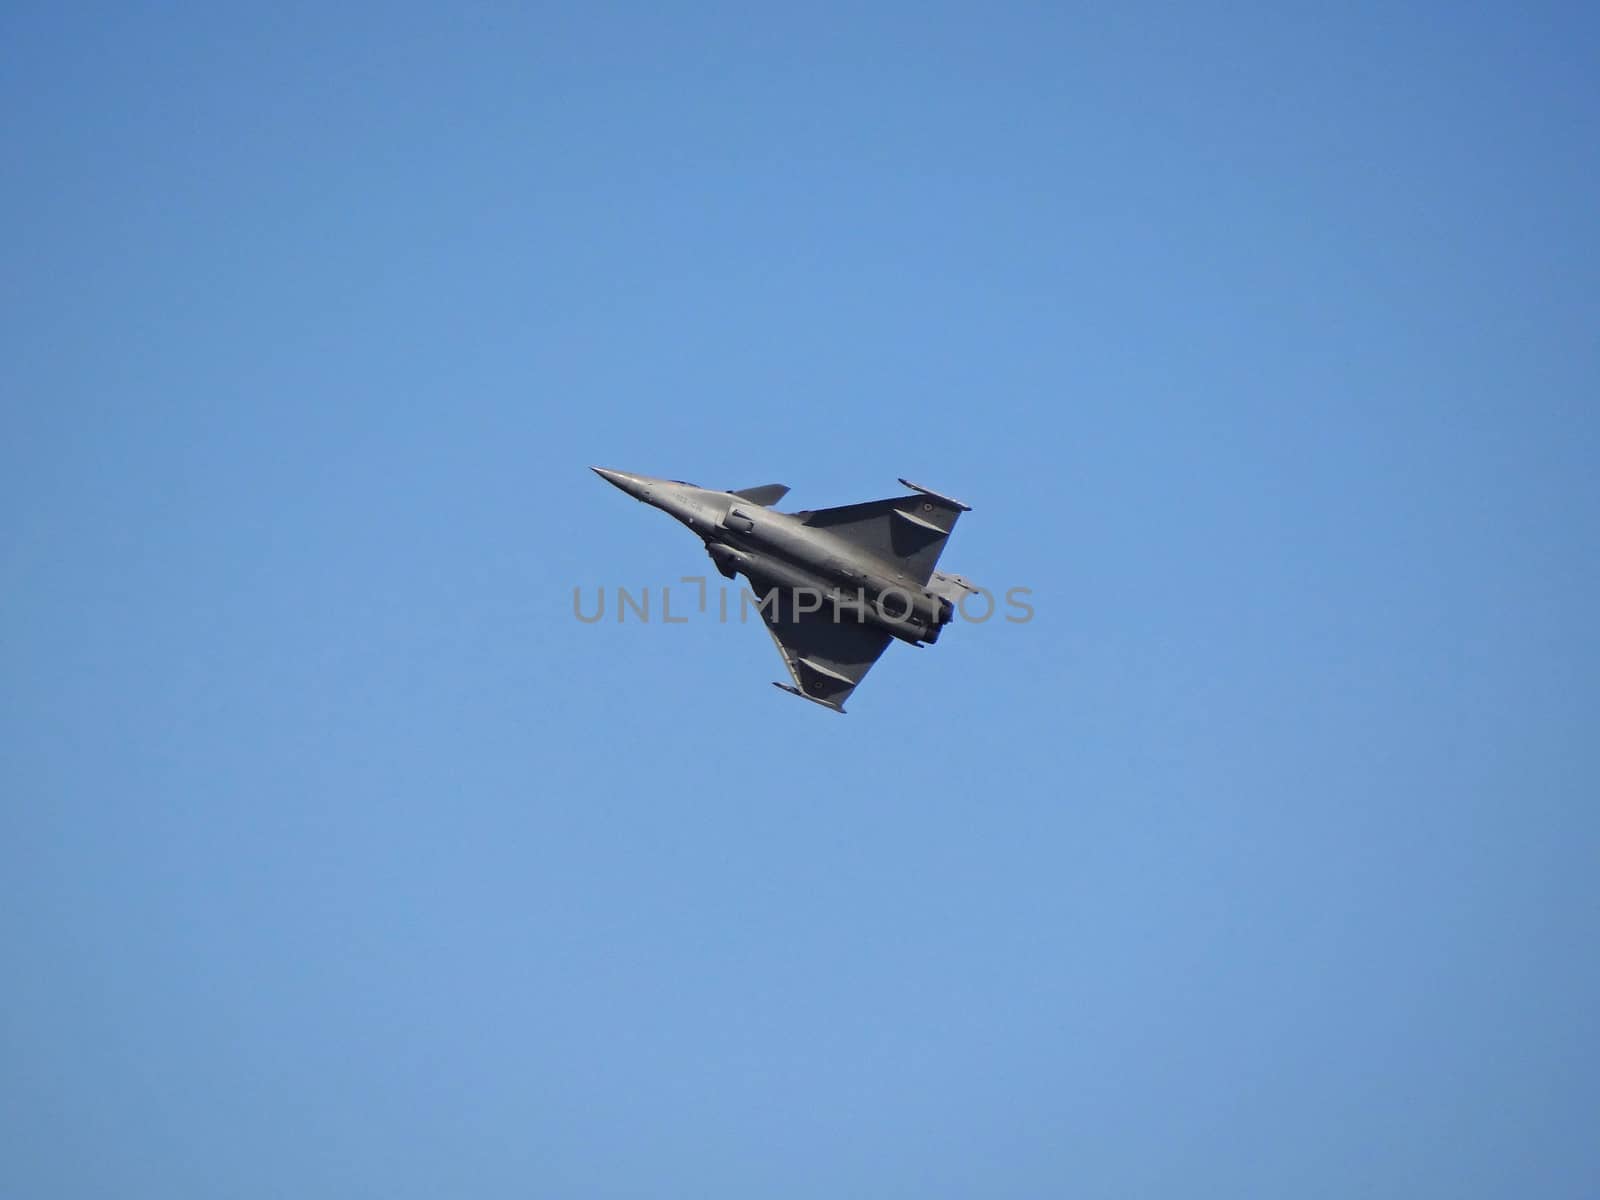 rafale at an airshow in france